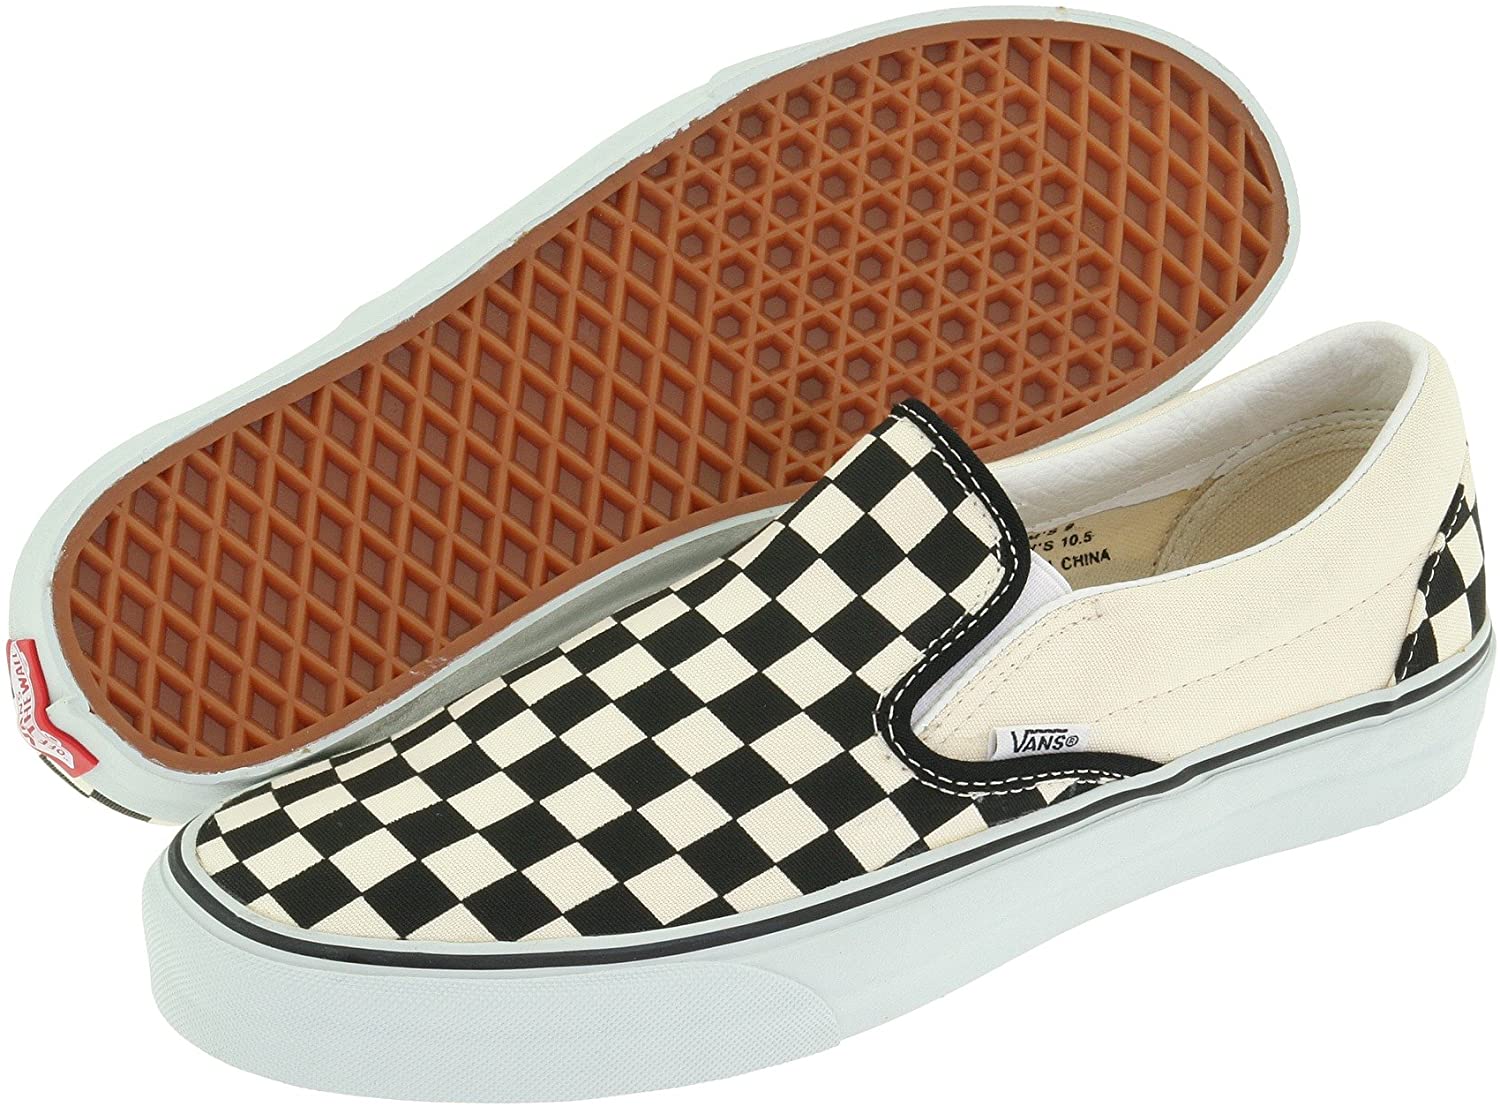 Checkerboard Slip-On Shoes